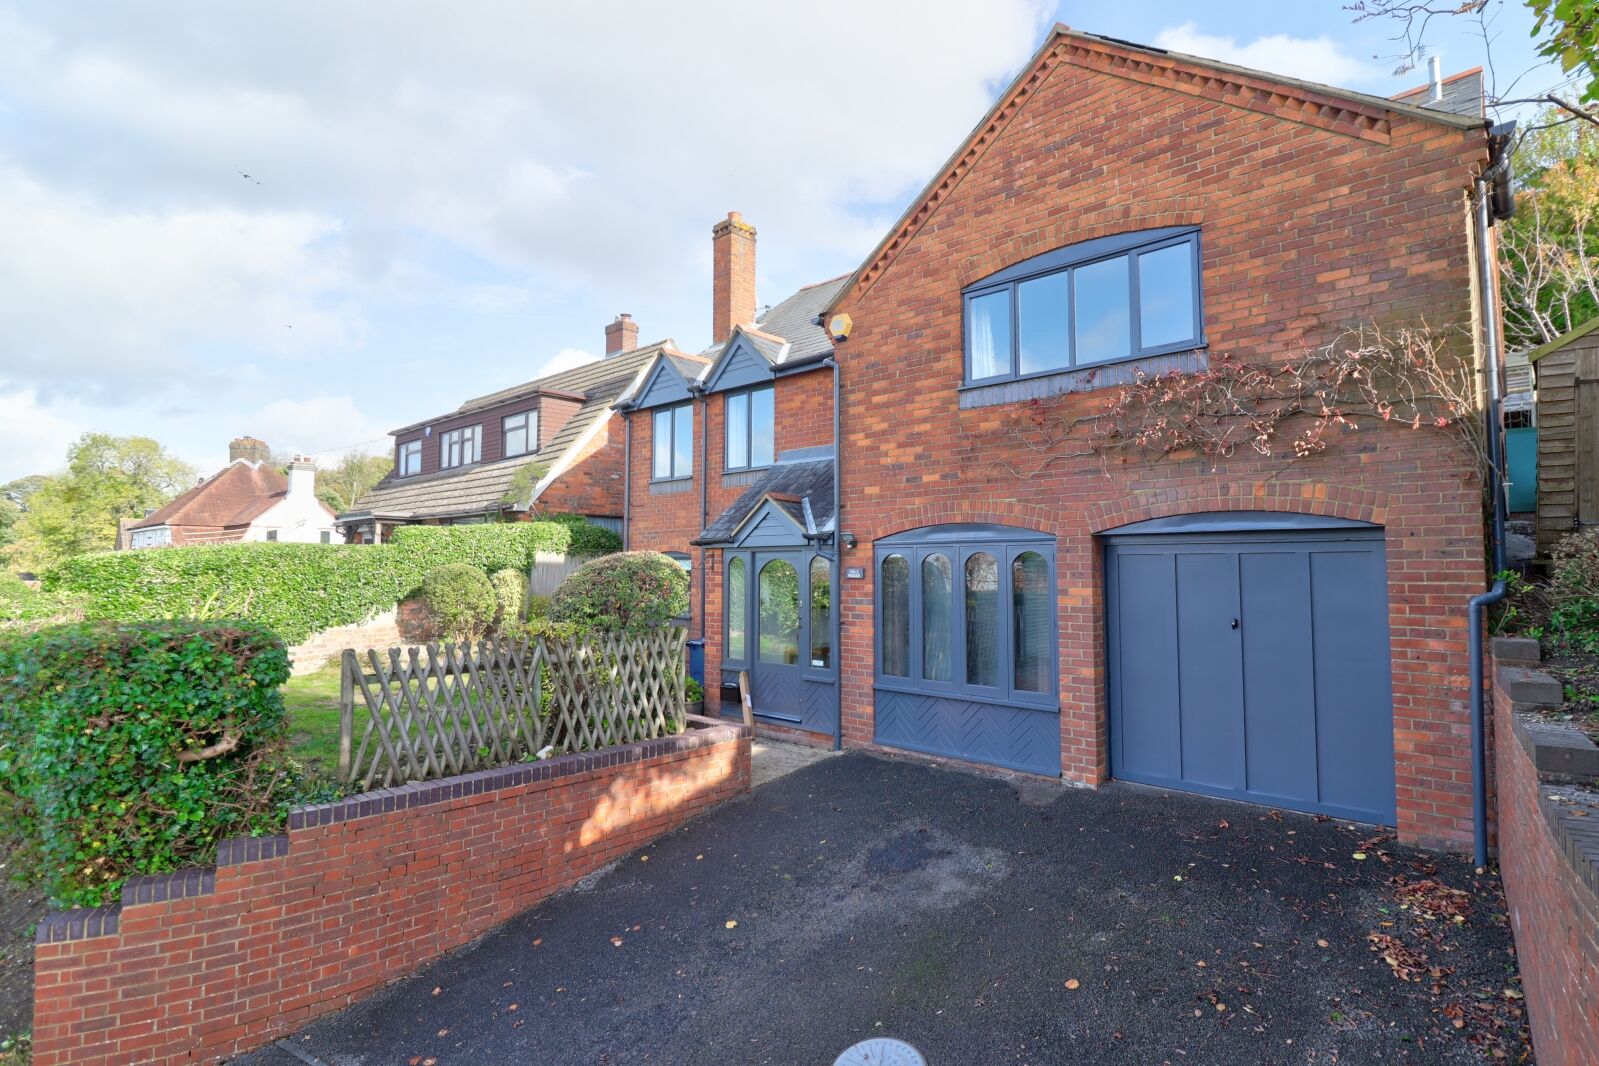 5 bedroom detached house to rent, Available now Lower Road, Loosley Row, HP27, main image